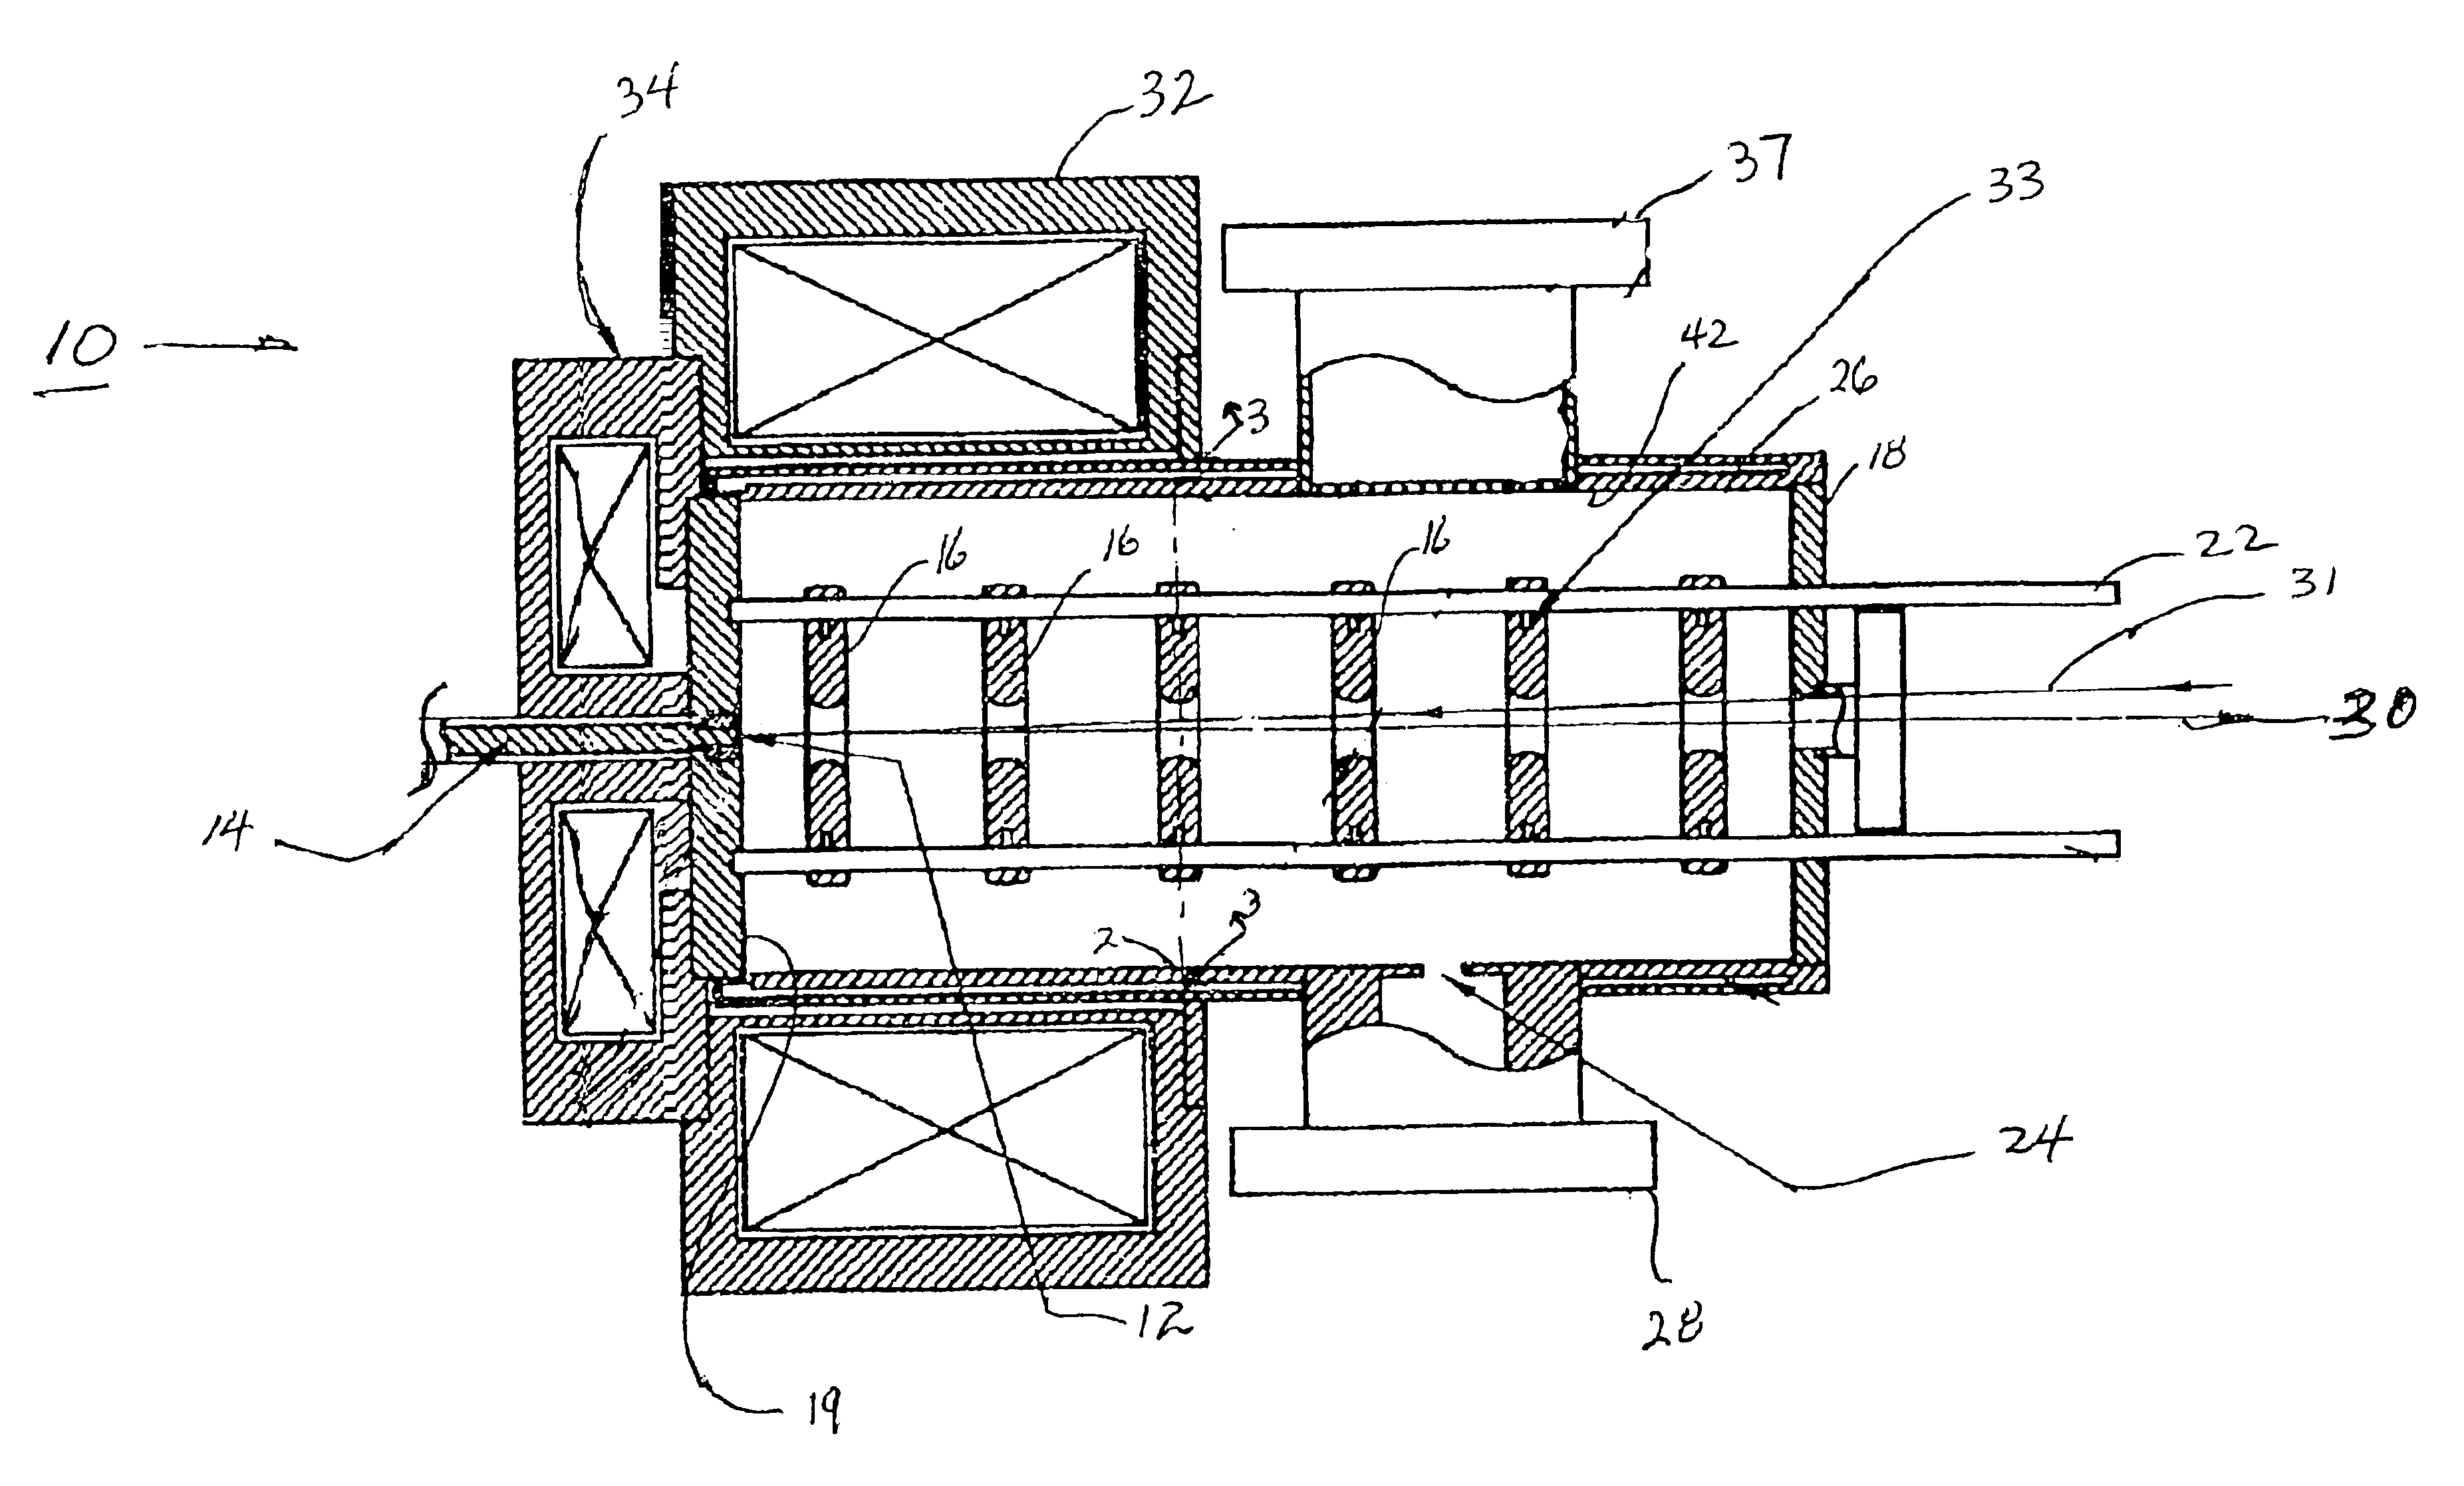 Photoelectron linear accelerator for producing a low emittance polarized electron beam